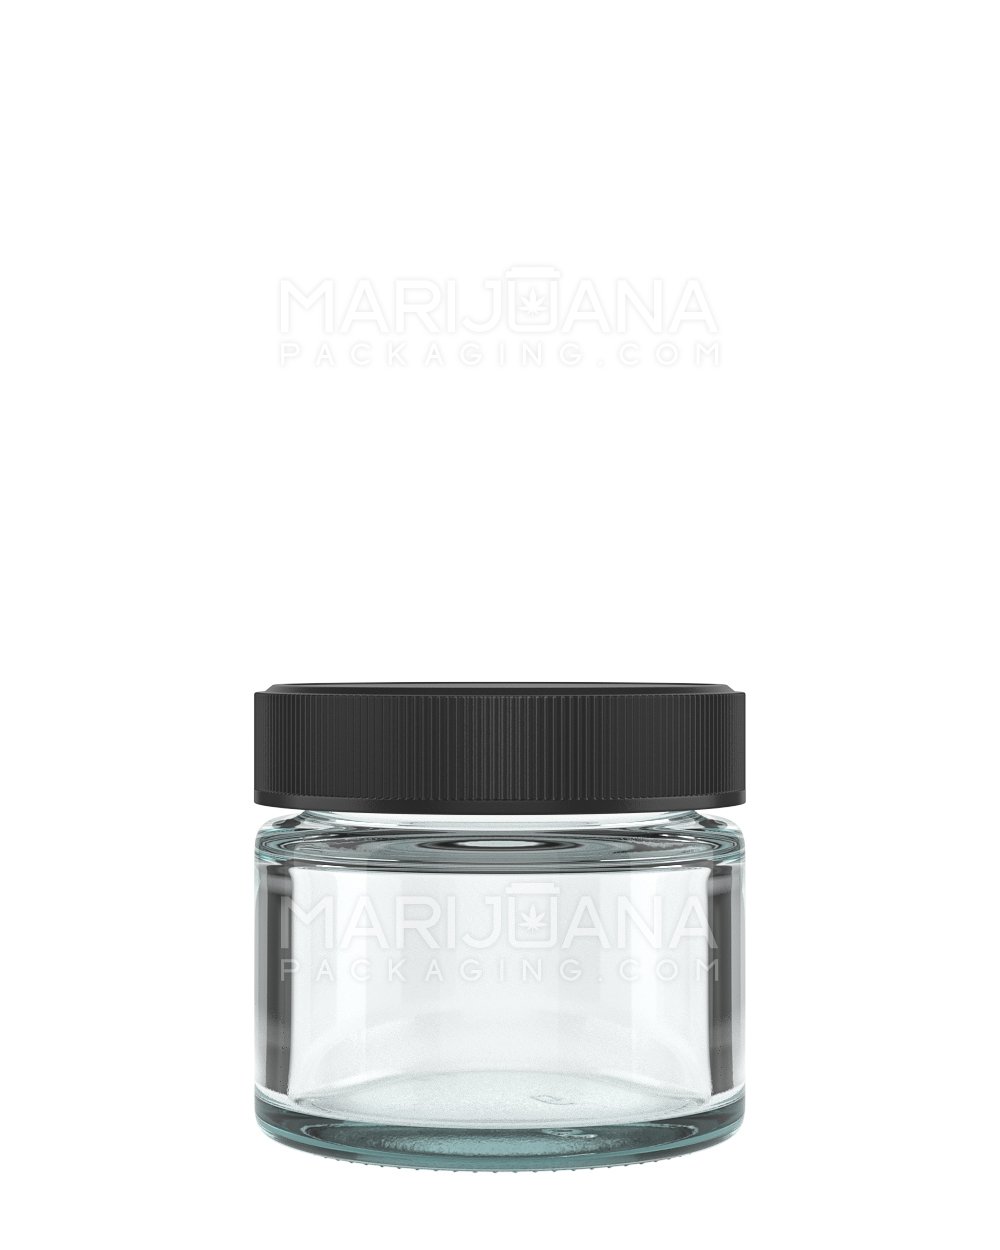 Straight Sided Clear Glass Jars with Black Cap | 53mm - 2oz - 240 Count - 1